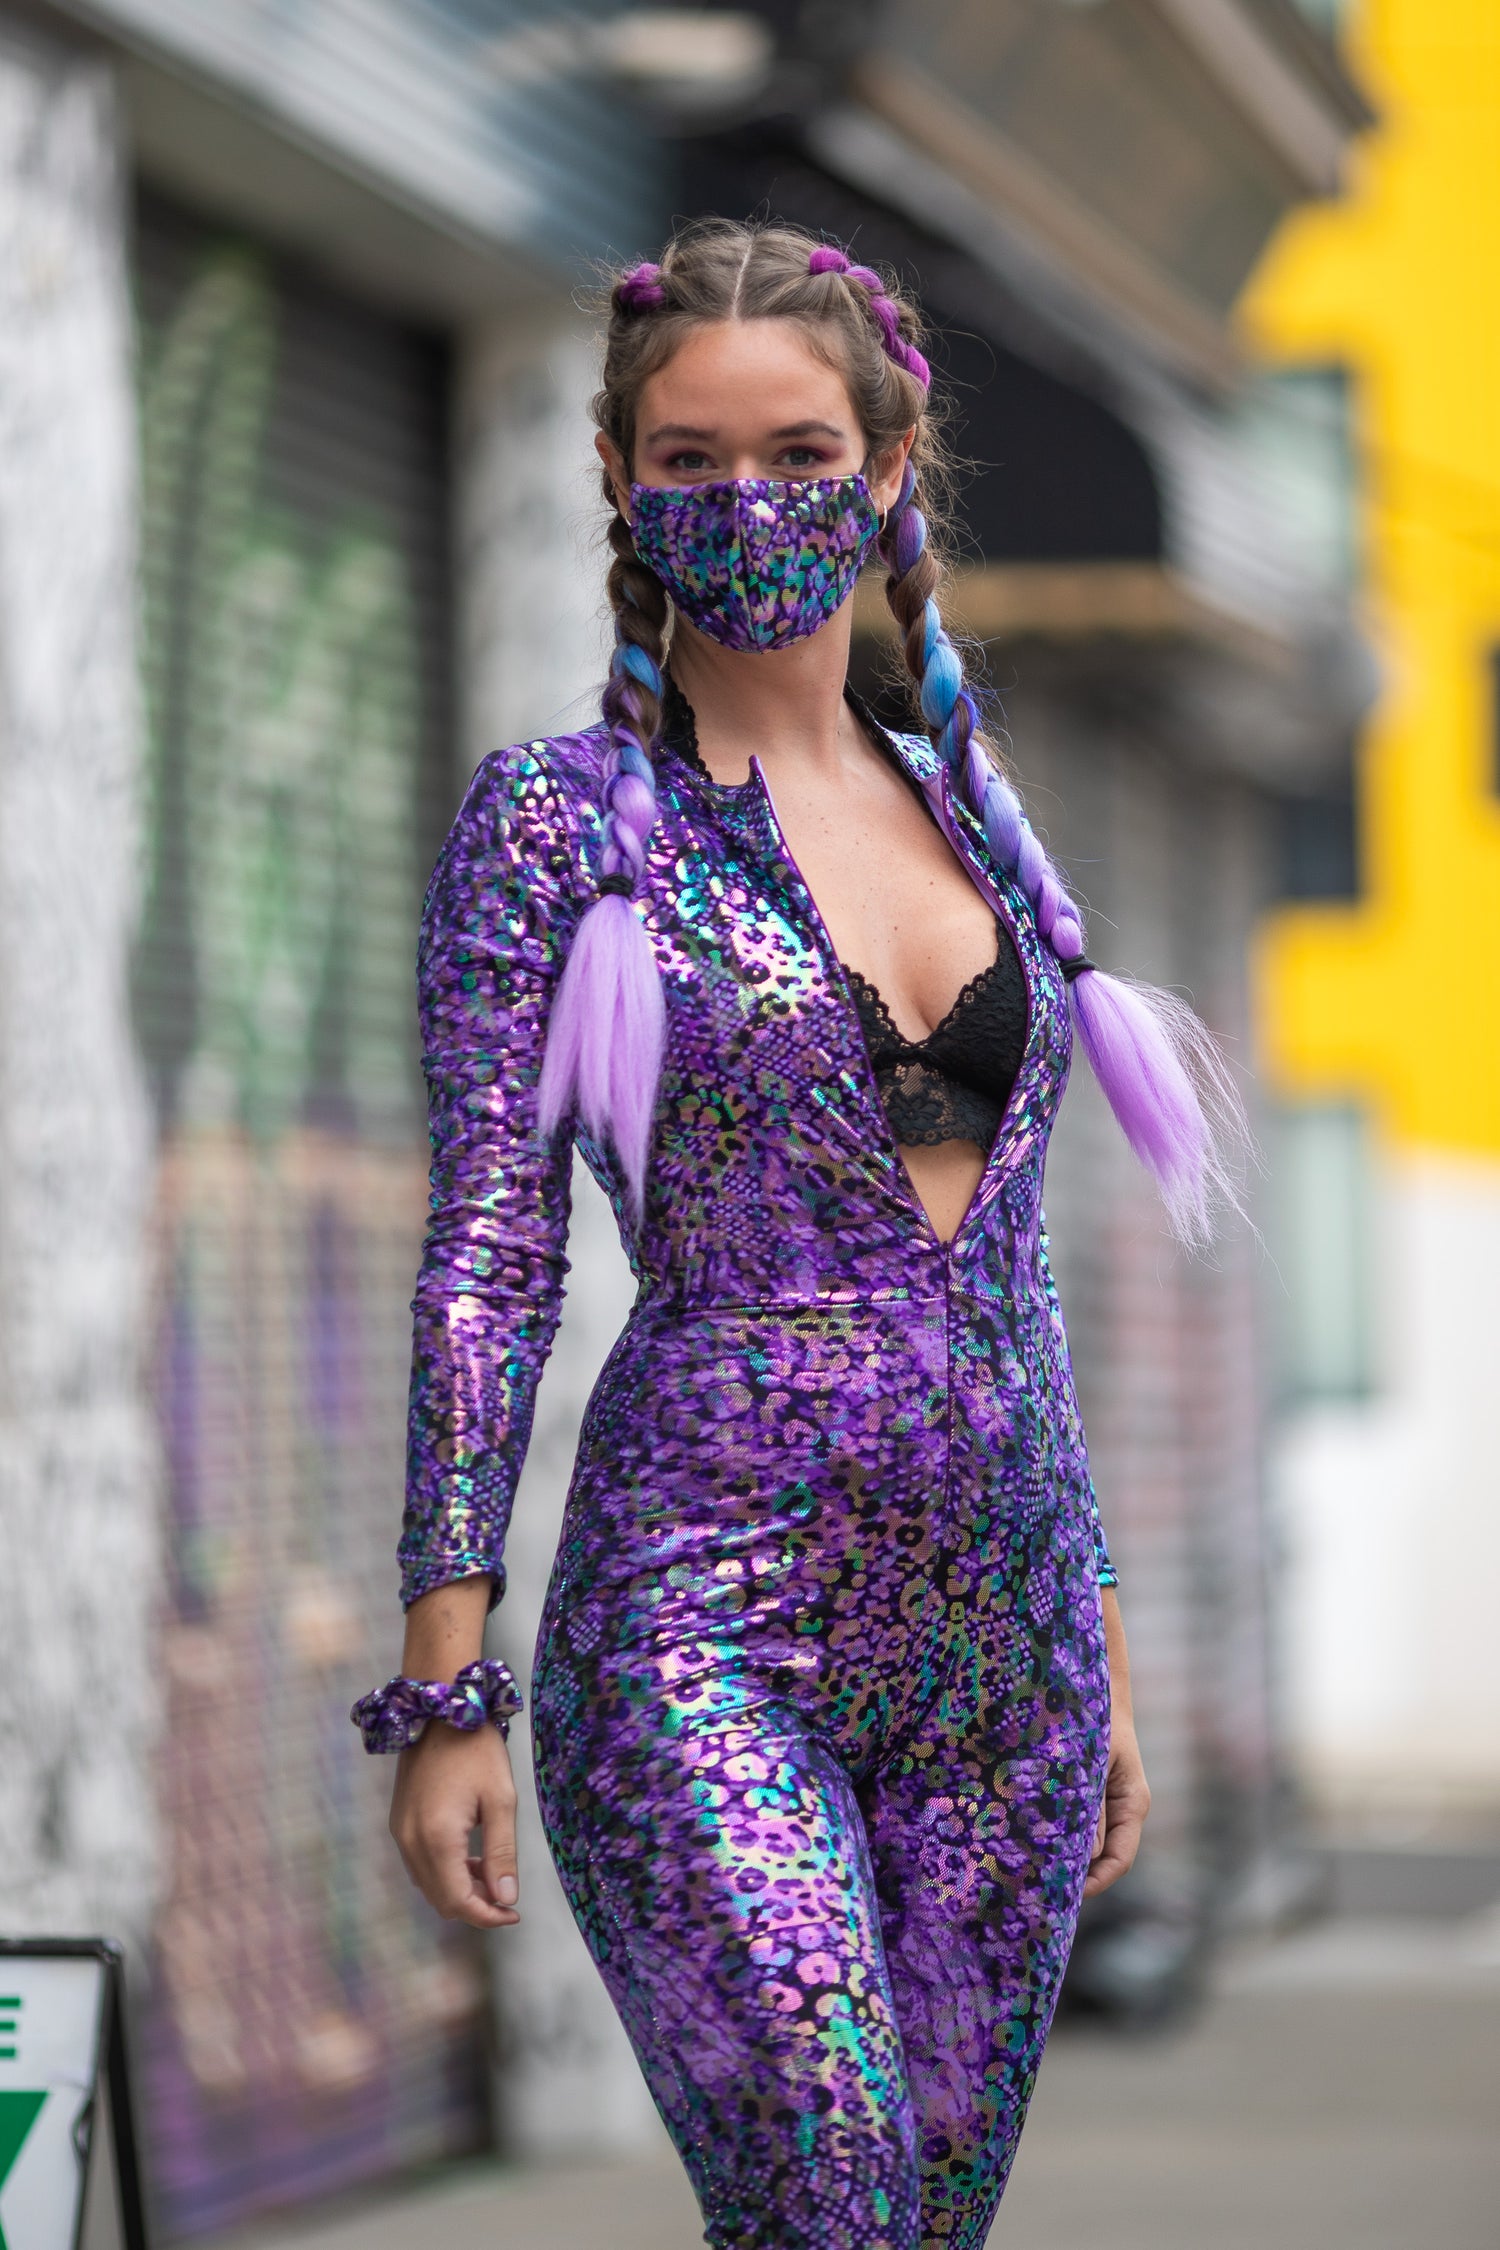 Unisex-music fesival fashion - Festival-outfit-rave-outfit - handmade-in-Brooklyn-New York City-custom made-waste conscious – psychedelic fashion – retro style – hippie fashion –handmade – womens festival fashion – Zip Front Catsuit – full bodysuit – onesies – full body costumes – womens rave fashion - leopard purple sparkle - close up on model